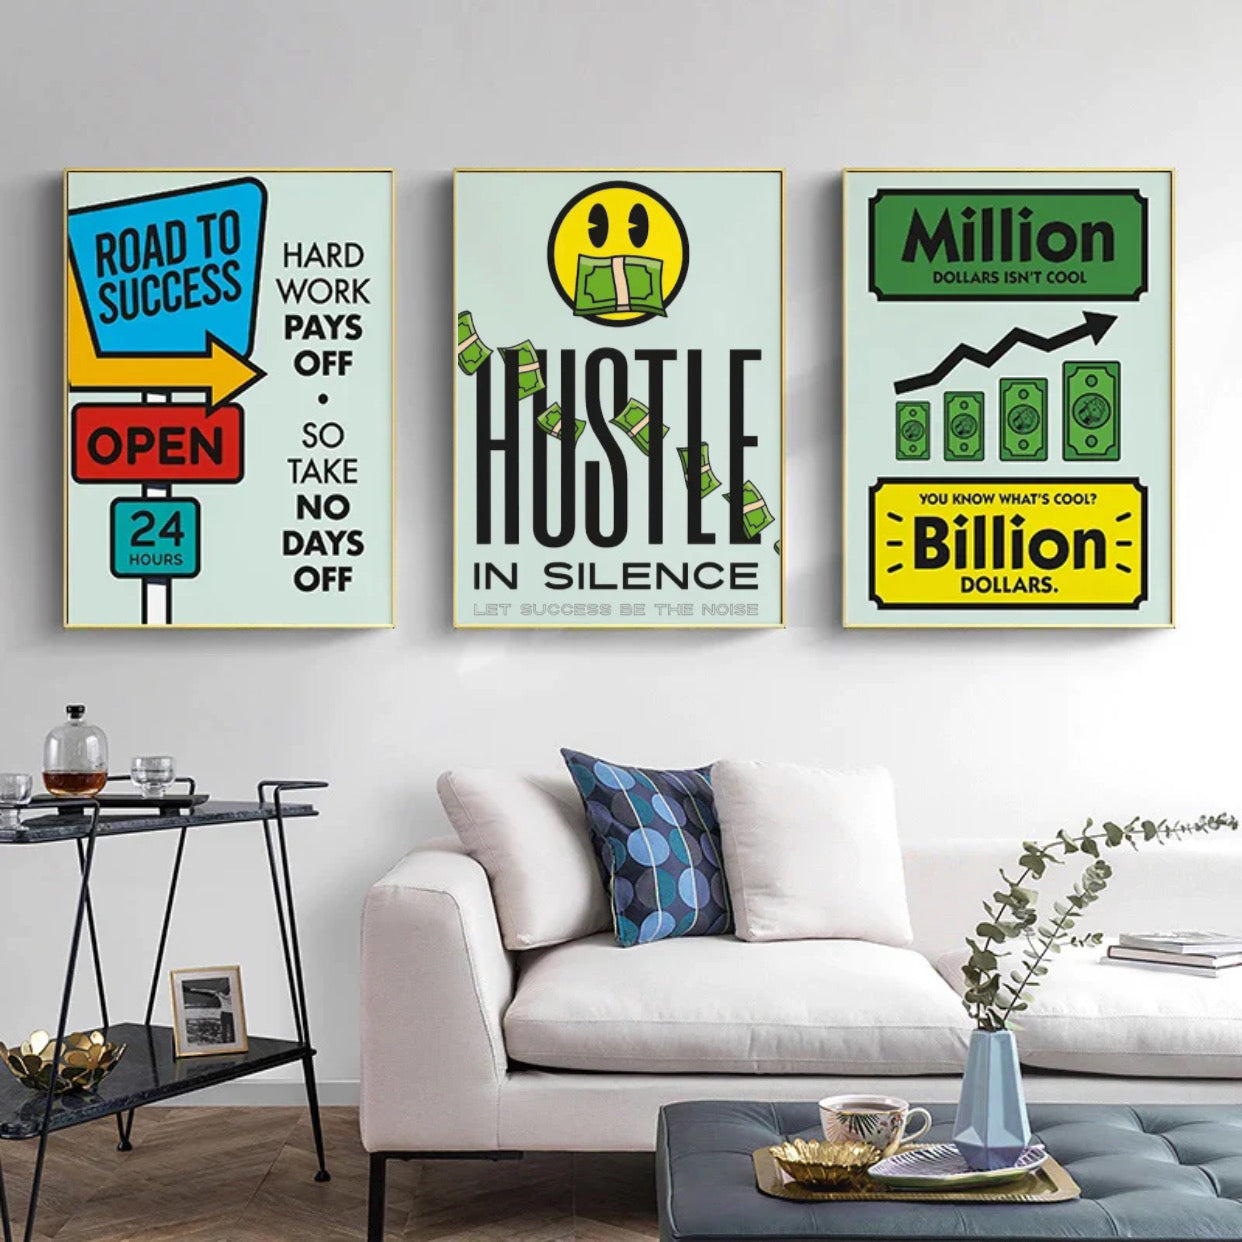 "hustle in silente let success be the noise" poster